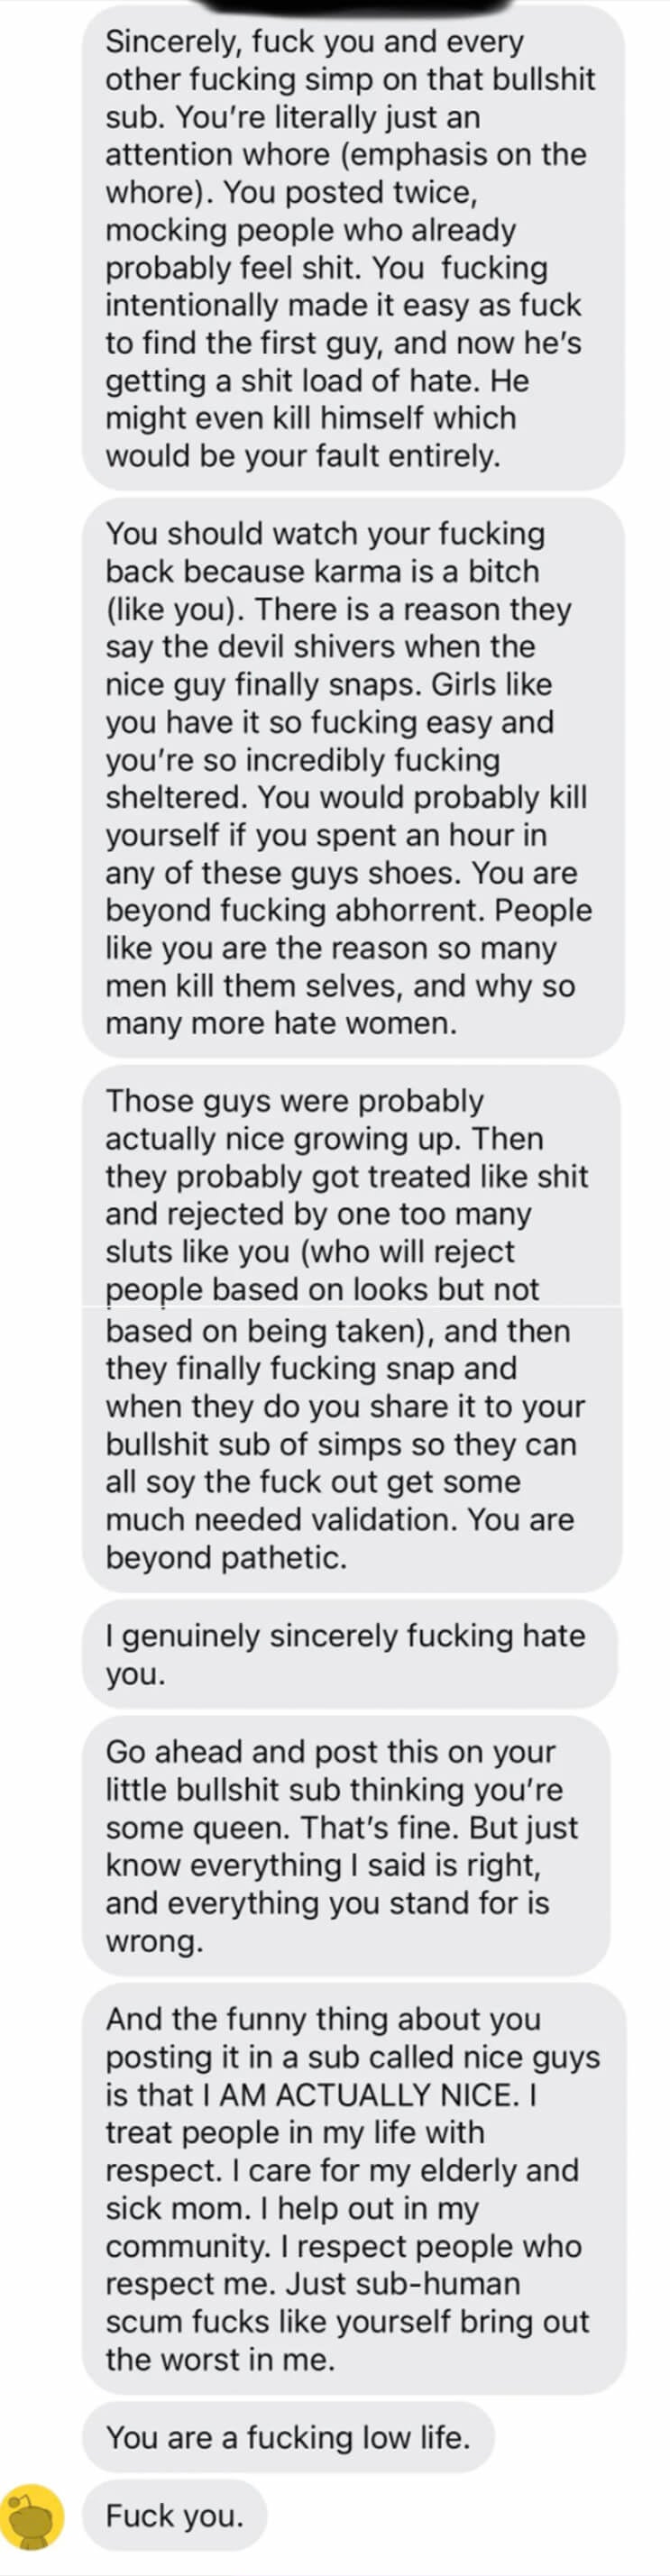 messages calling a girl an attention-grabber and saying she&#x27;s the reason men hate women and that men kill themselves, and that he&#x27;s actually nice in real life